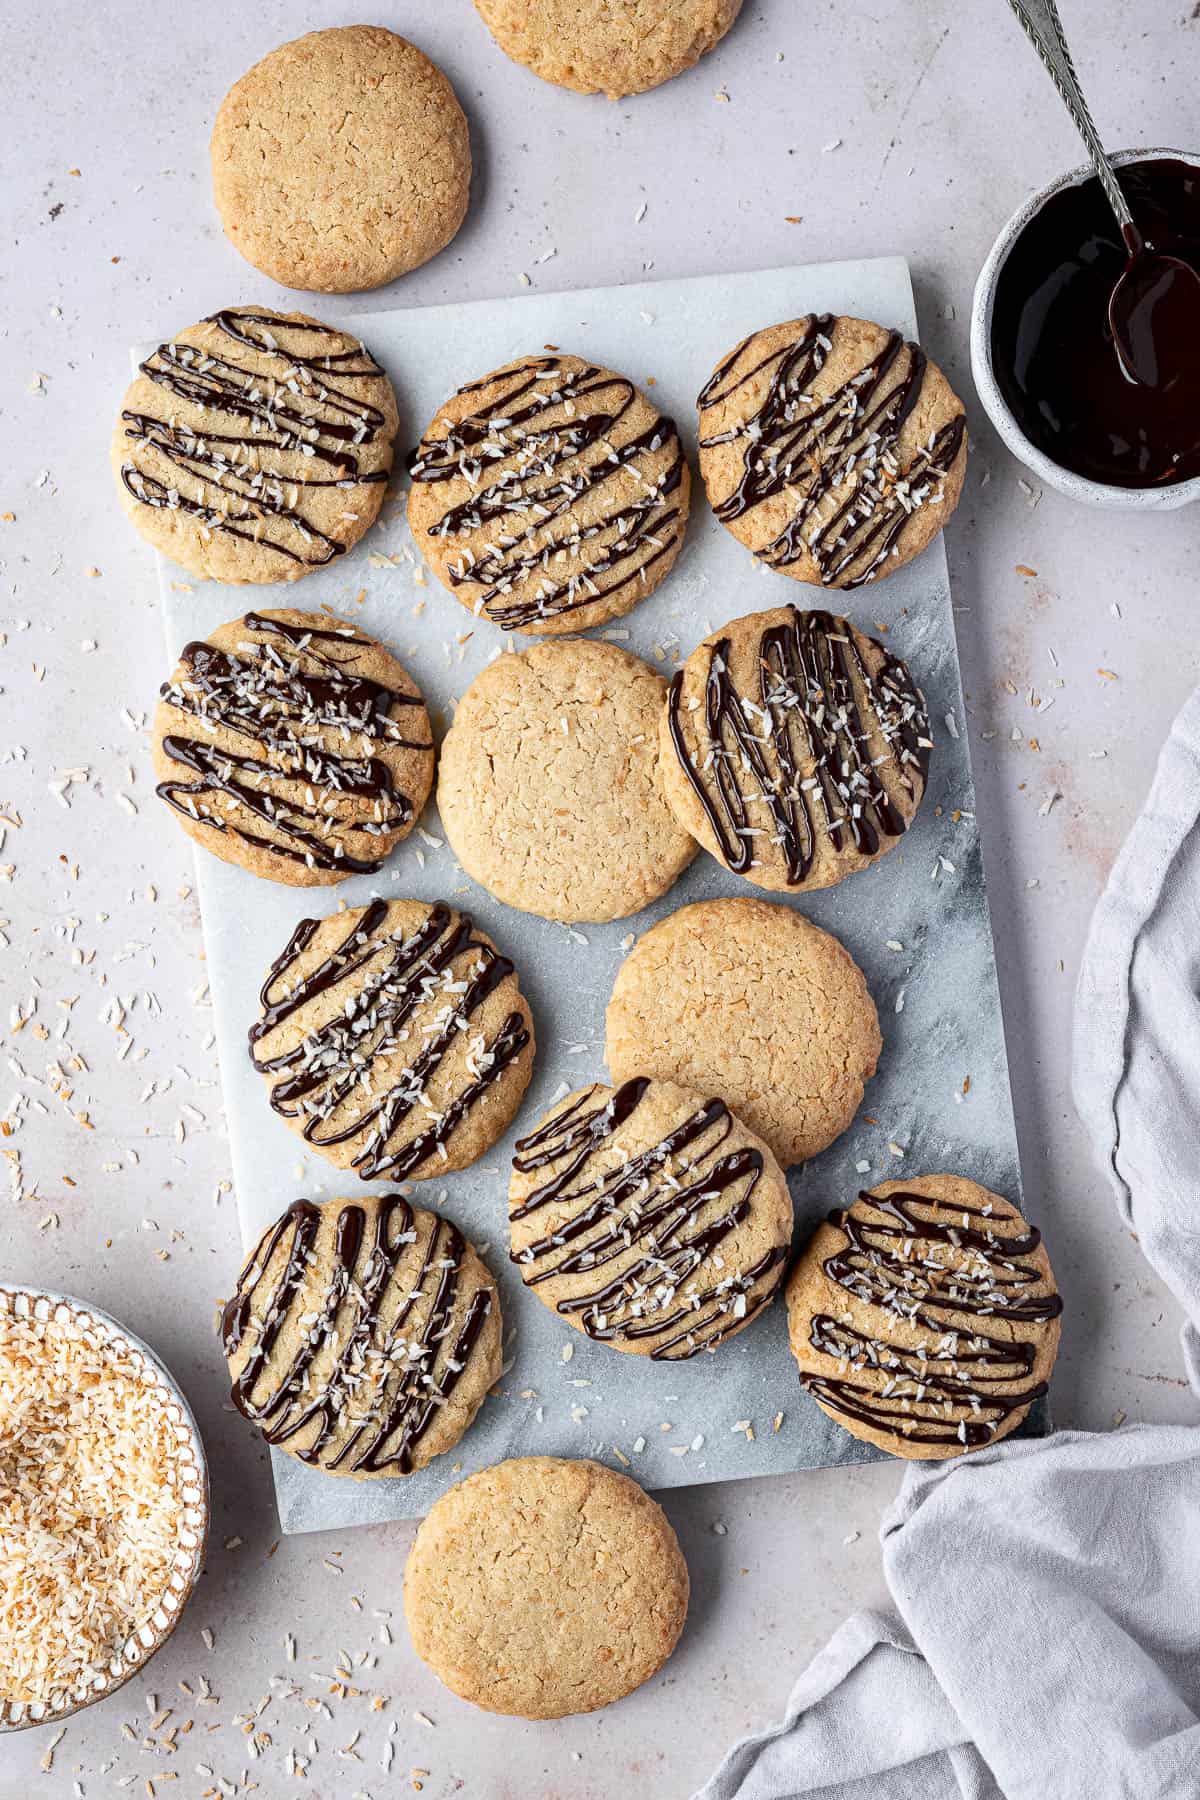 Vegan coconut cookies on a ,marble board with bowls of melted chocolate and toasted coconut.